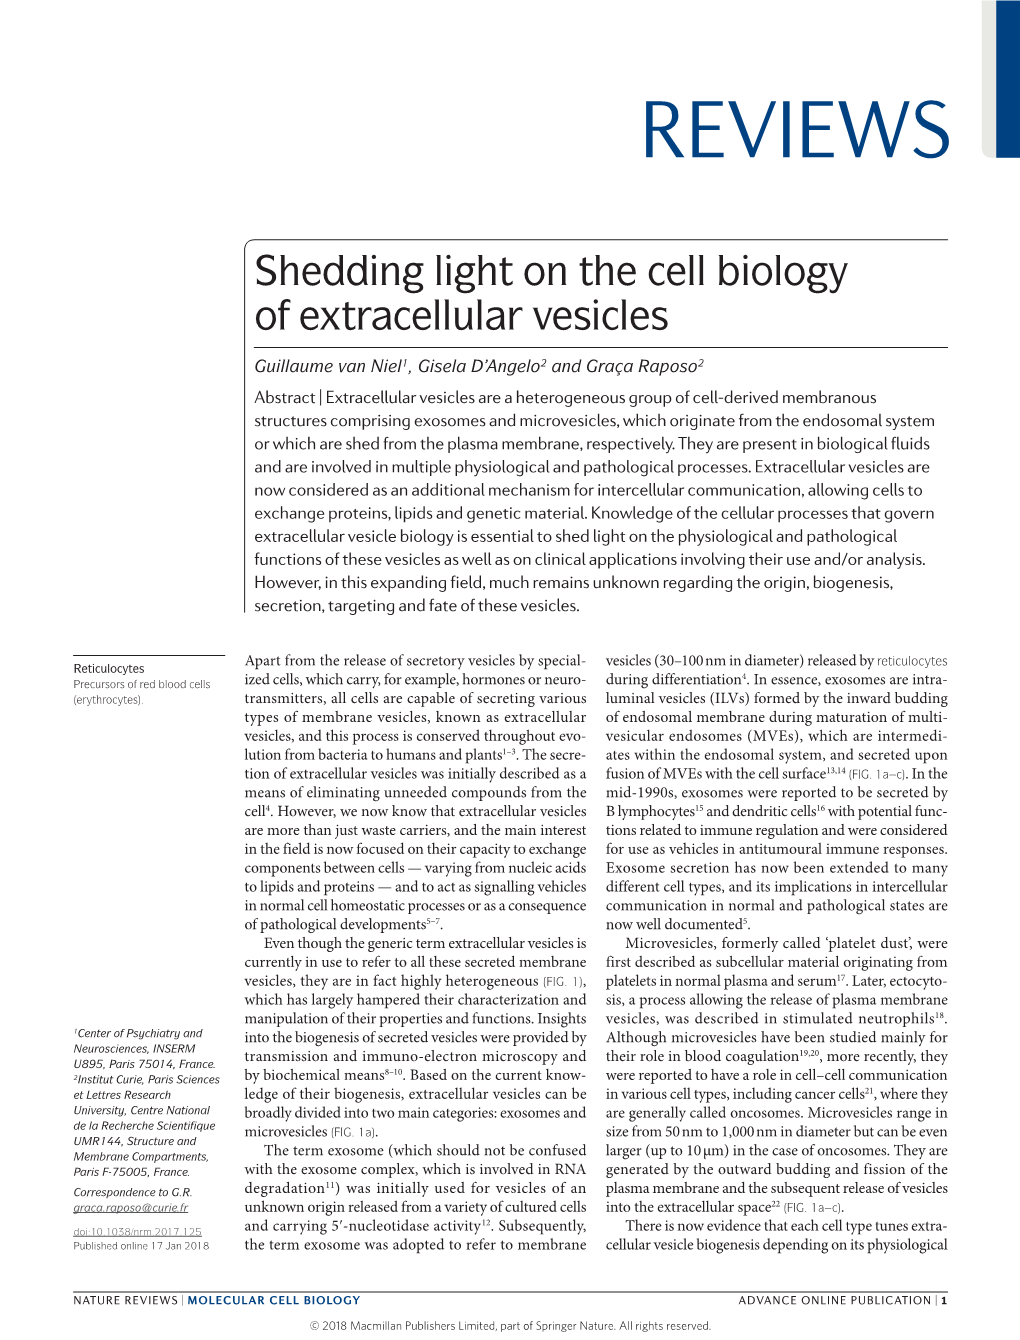 Shedding Light on the Cell Biology of Extracellular Vesicles